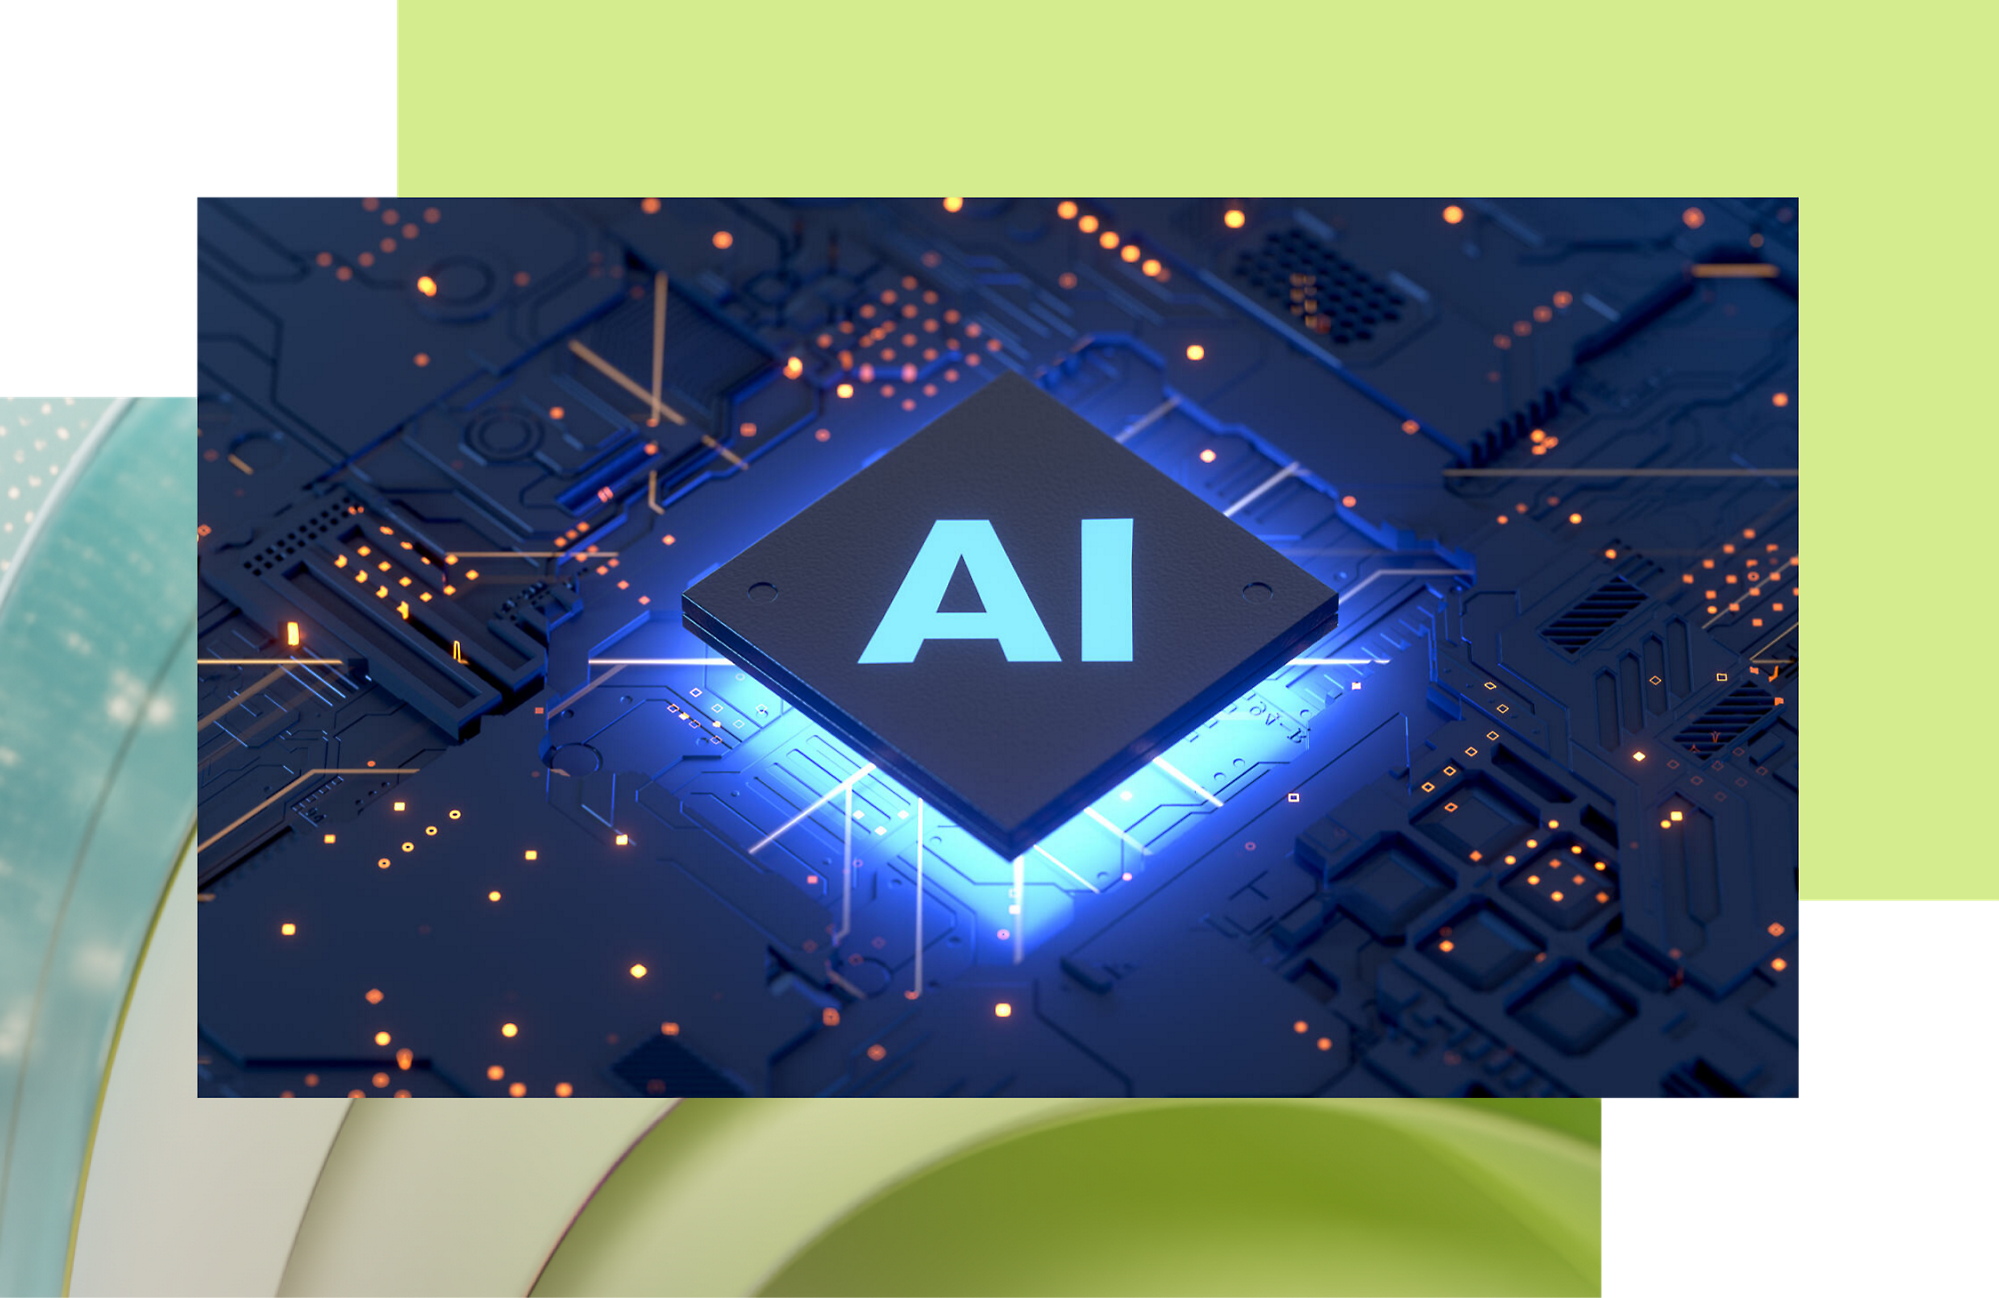 A computer chip labeled "ai" illuminated with blue lights, surrounded by circuitry on a dark background.